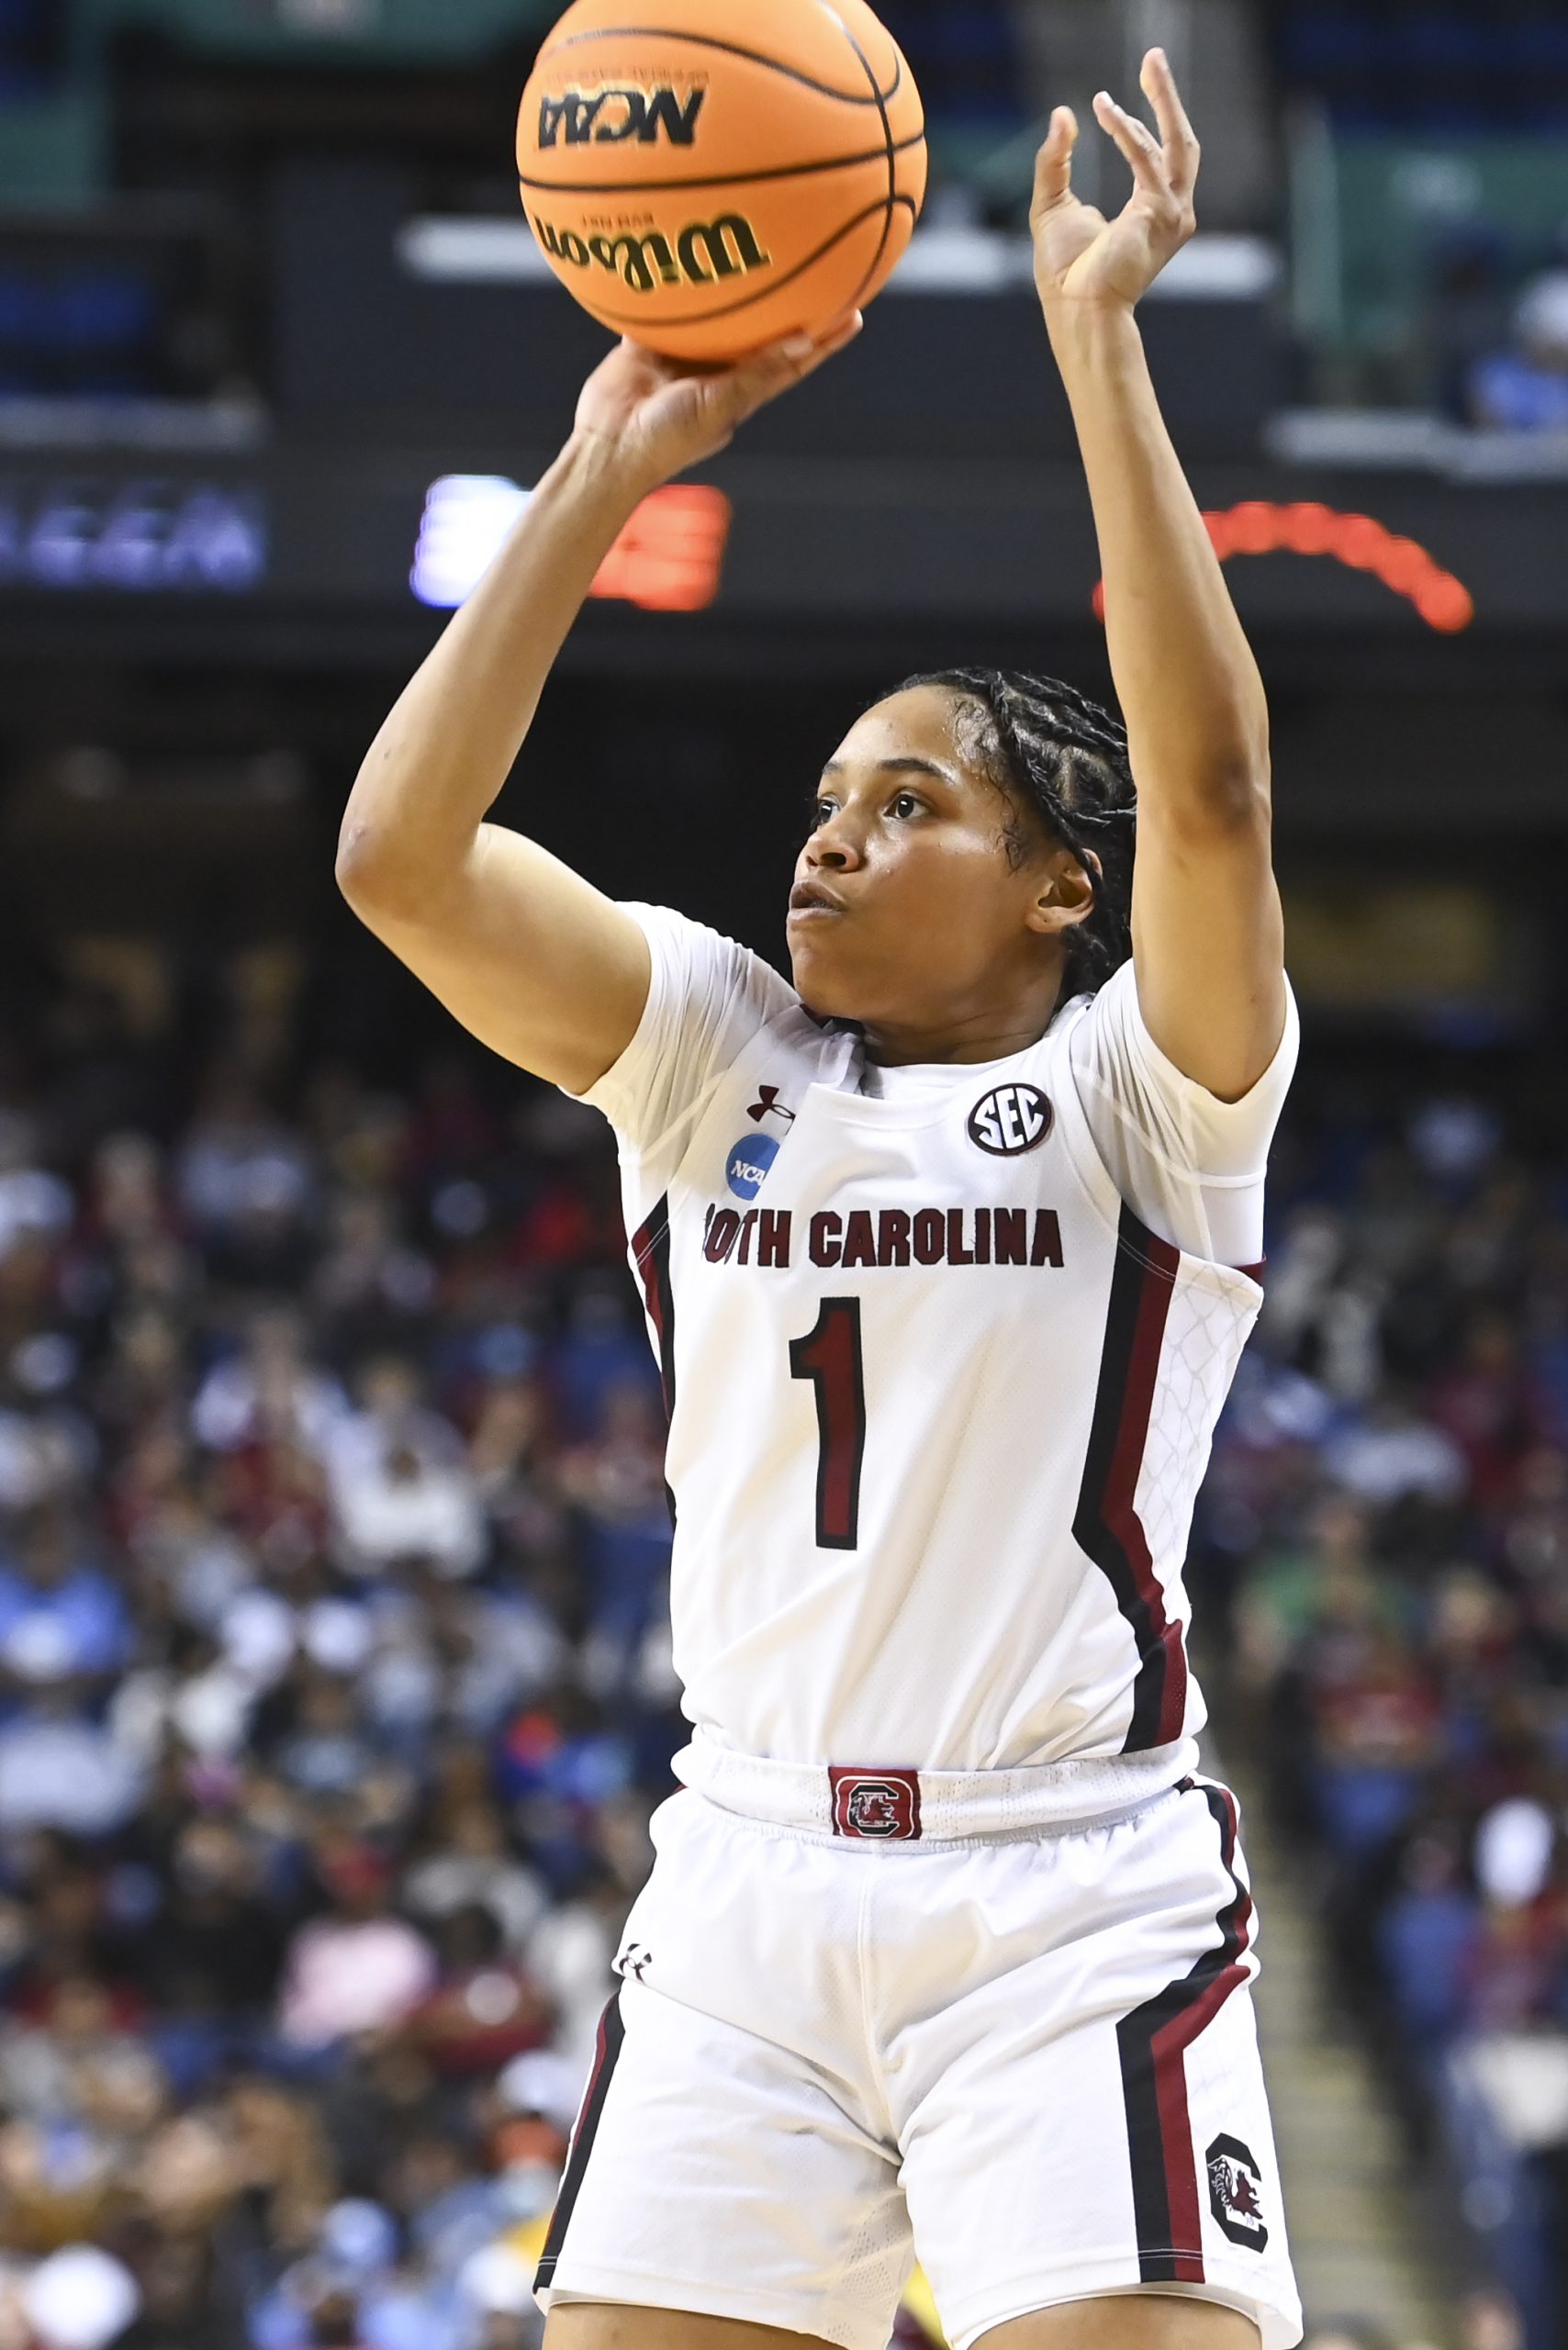 Gamecock Zia Cooke is considered one of the top college basketball players in potential earnings and has more than 220,000 followers on Instagram. Bloomberg values her promotional costs on Instagram at $8,000 each. She is represented by Erin Kane with Excel Sports Management. Photography courtesy of South Carolina Athletics